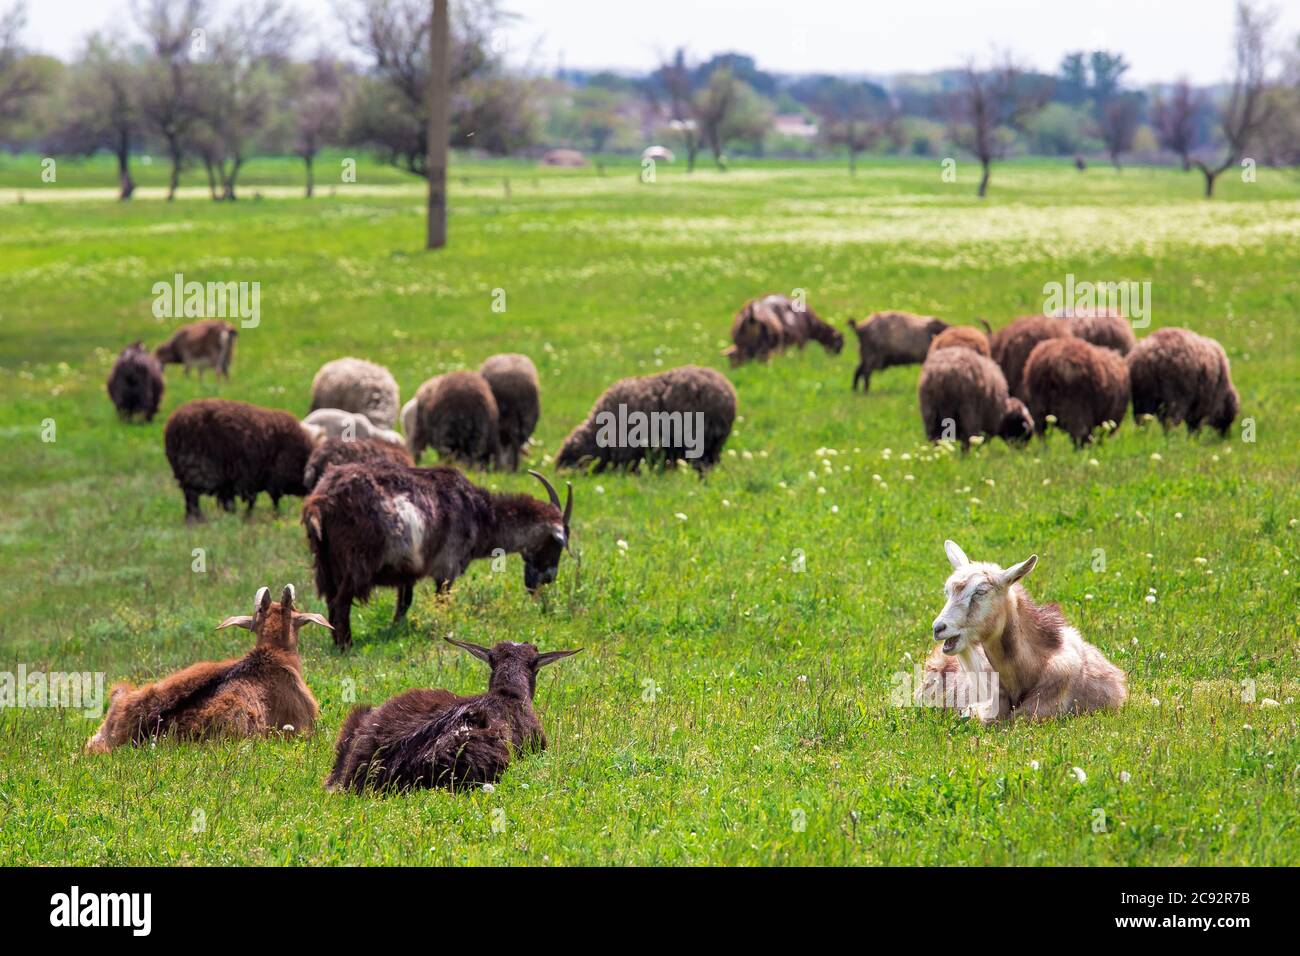 The black goat and sheep is grazed on a lawn, artiodactyls eats a green grass. Stock Photo